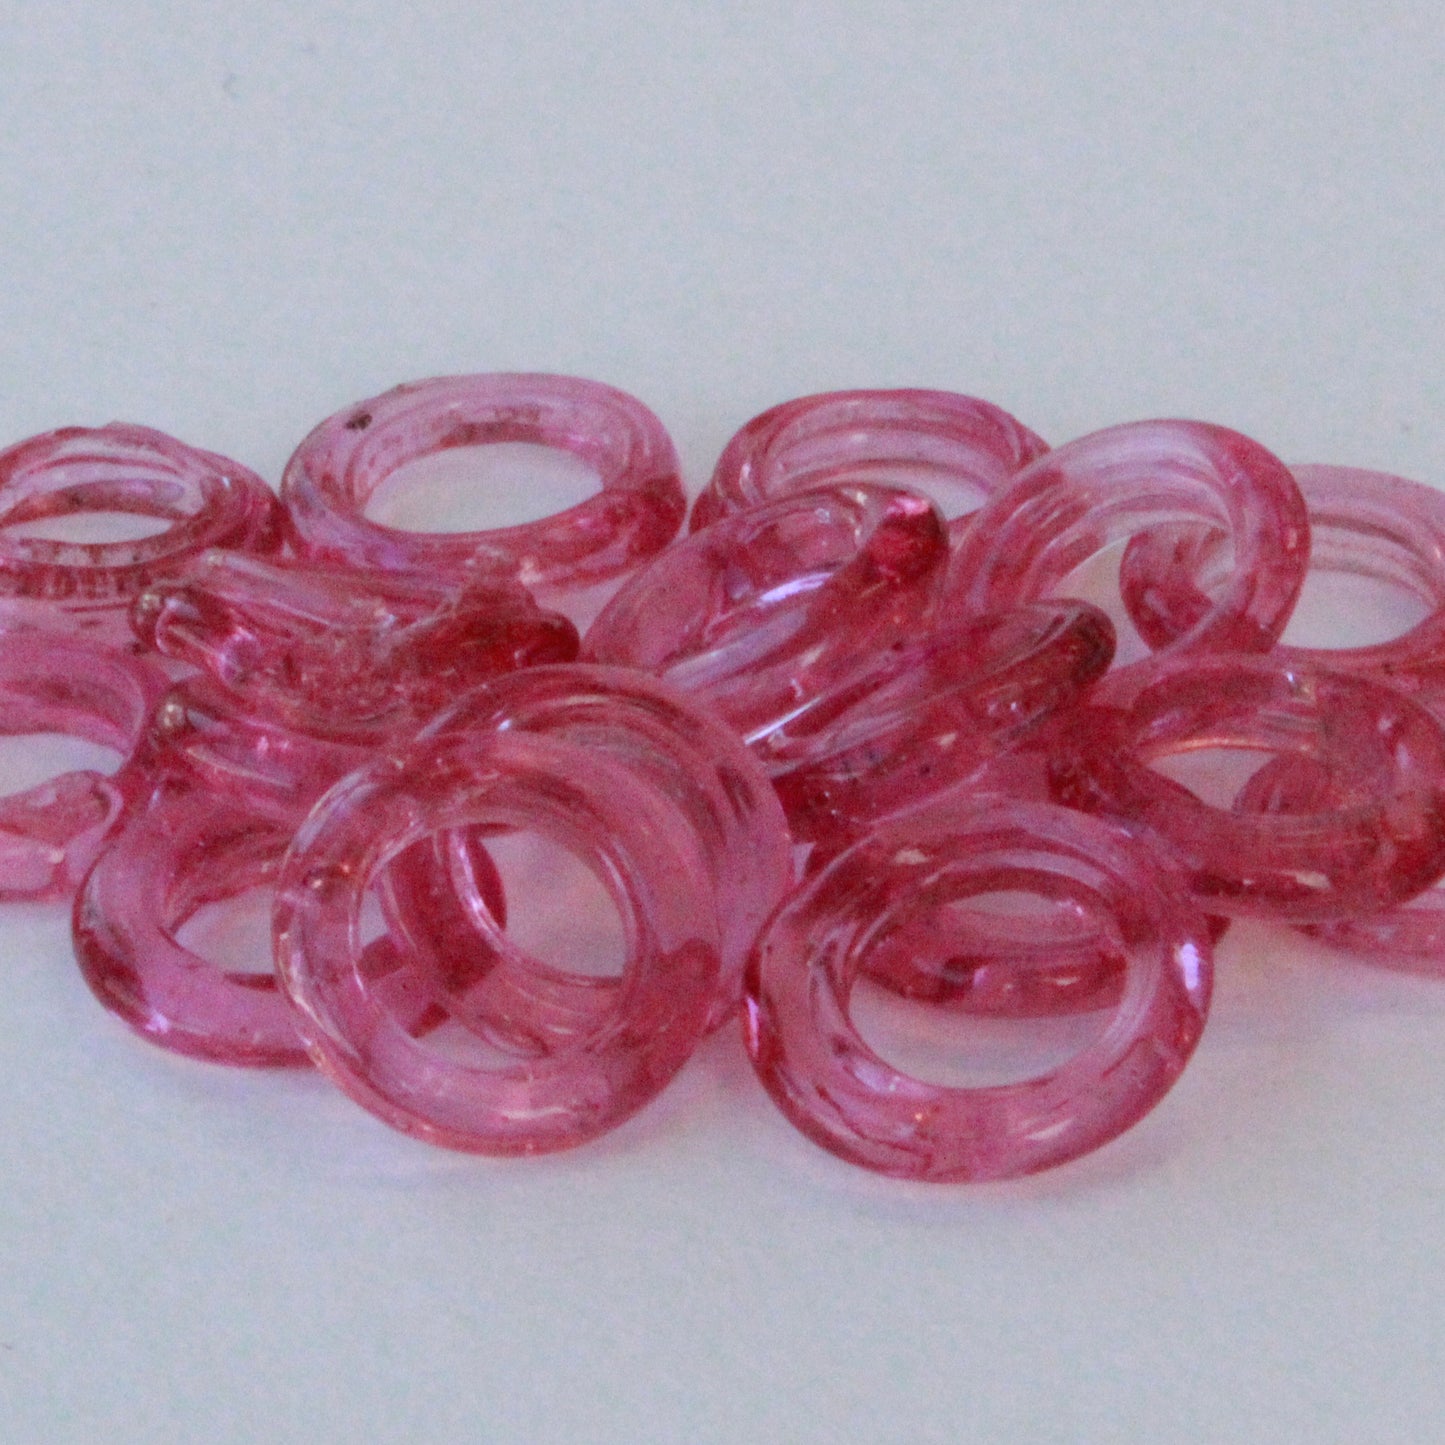 Handmade Glass Rings From Venice Italy  - Transparent Rosey Pink - 20 beads